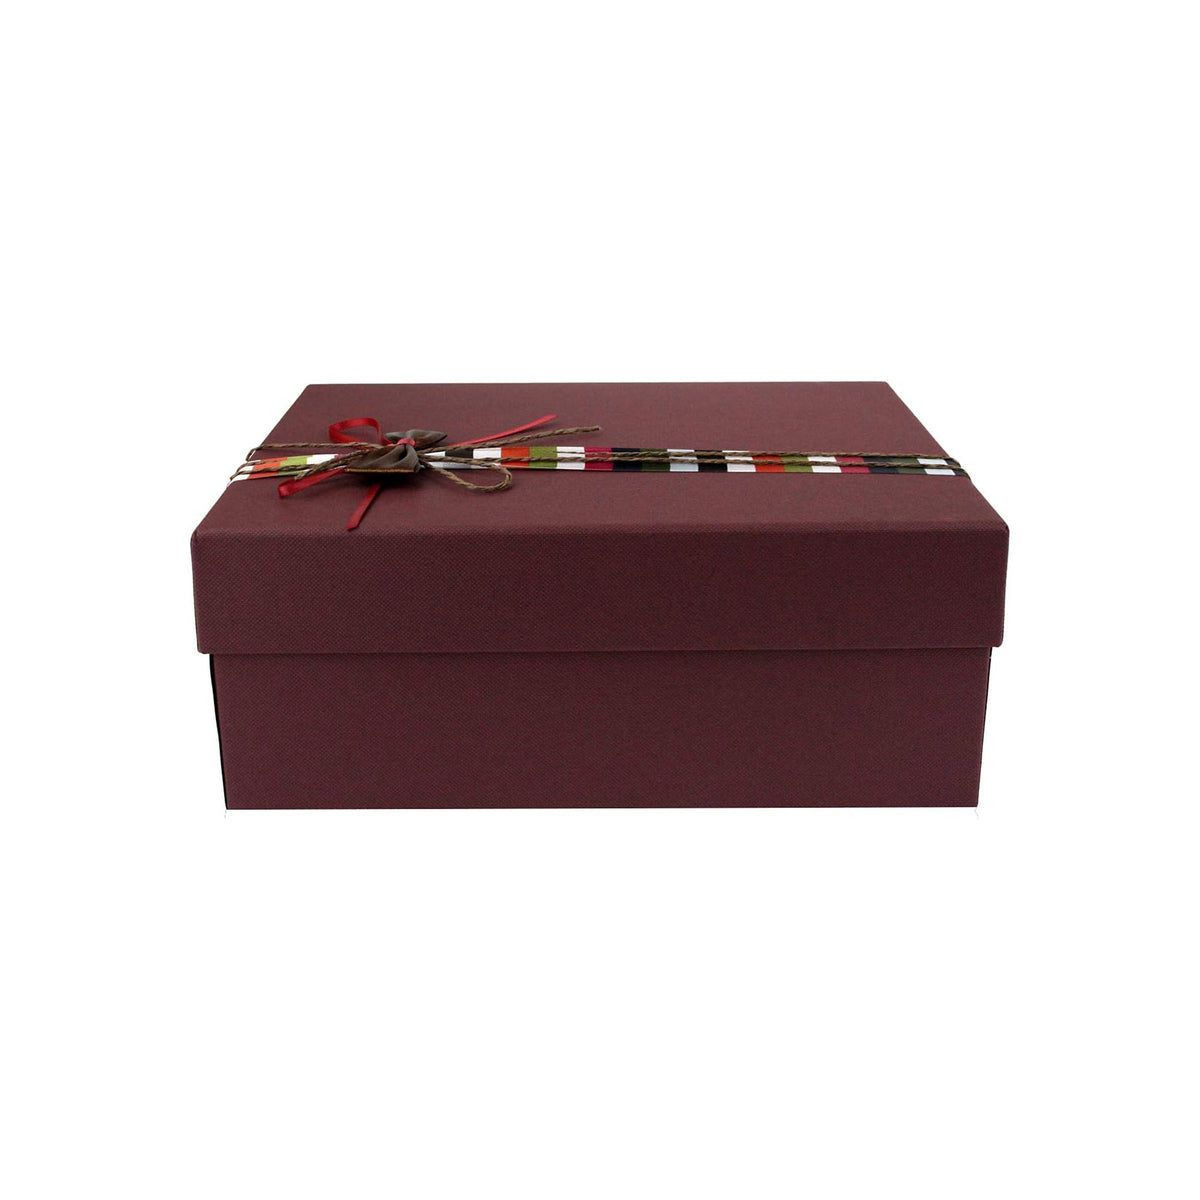 Single Burgandy with Multicolored Stripes Ribbon Gift Box (Sizes Available)